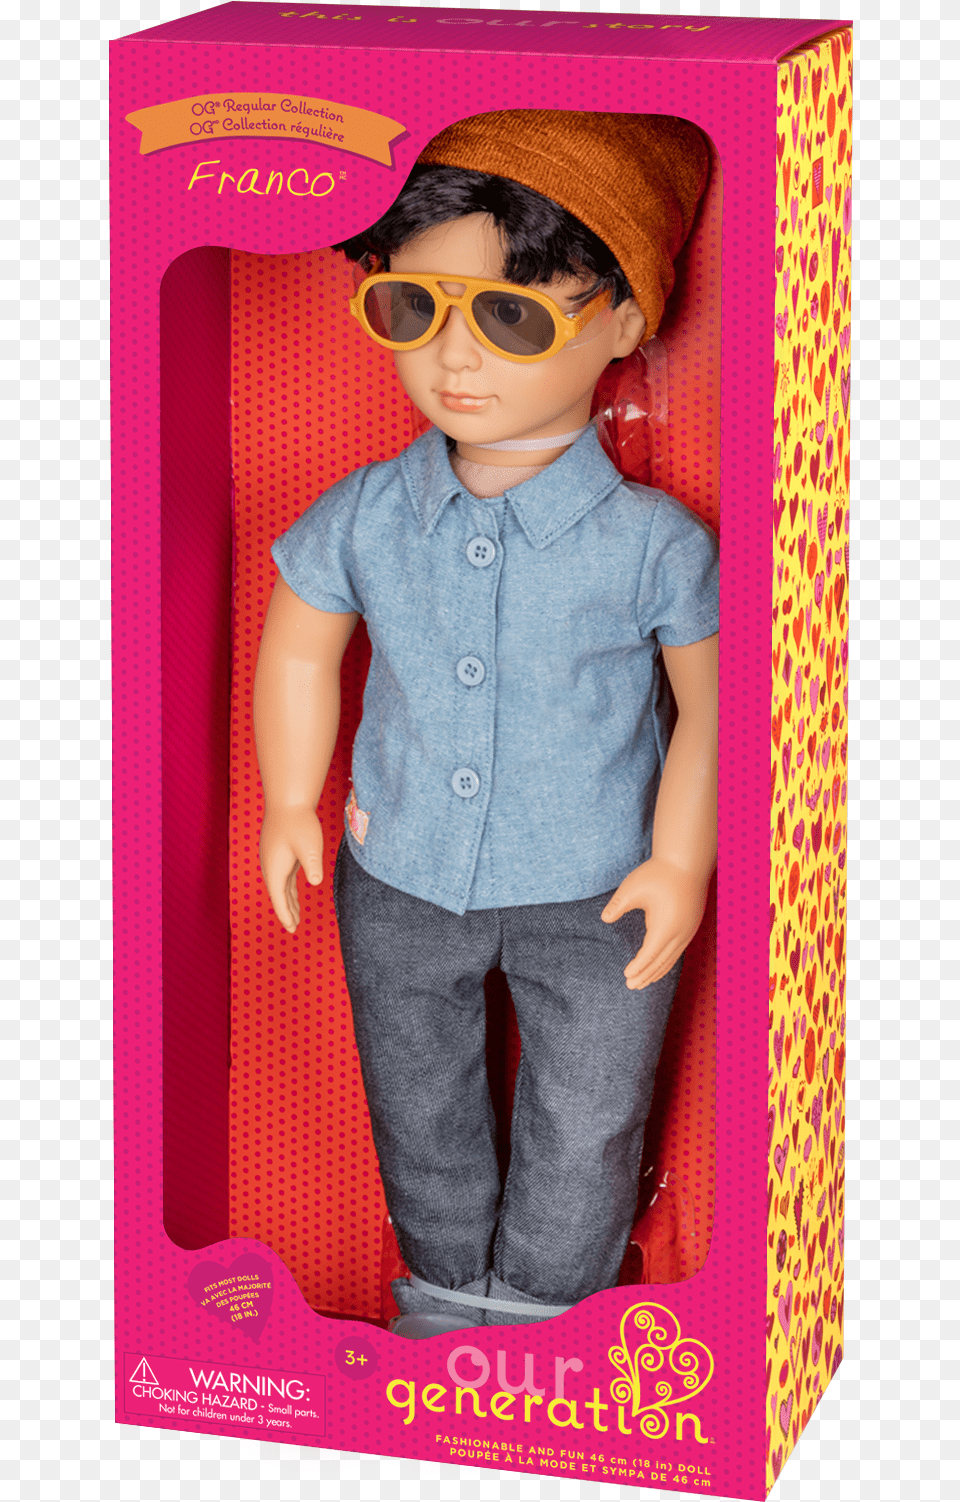 Franco Regular 18 Inch Boy Doll In Packaging Our Generation Boy Doll Franco, Accessories, Sunglasses, Child, Clothing Png Image